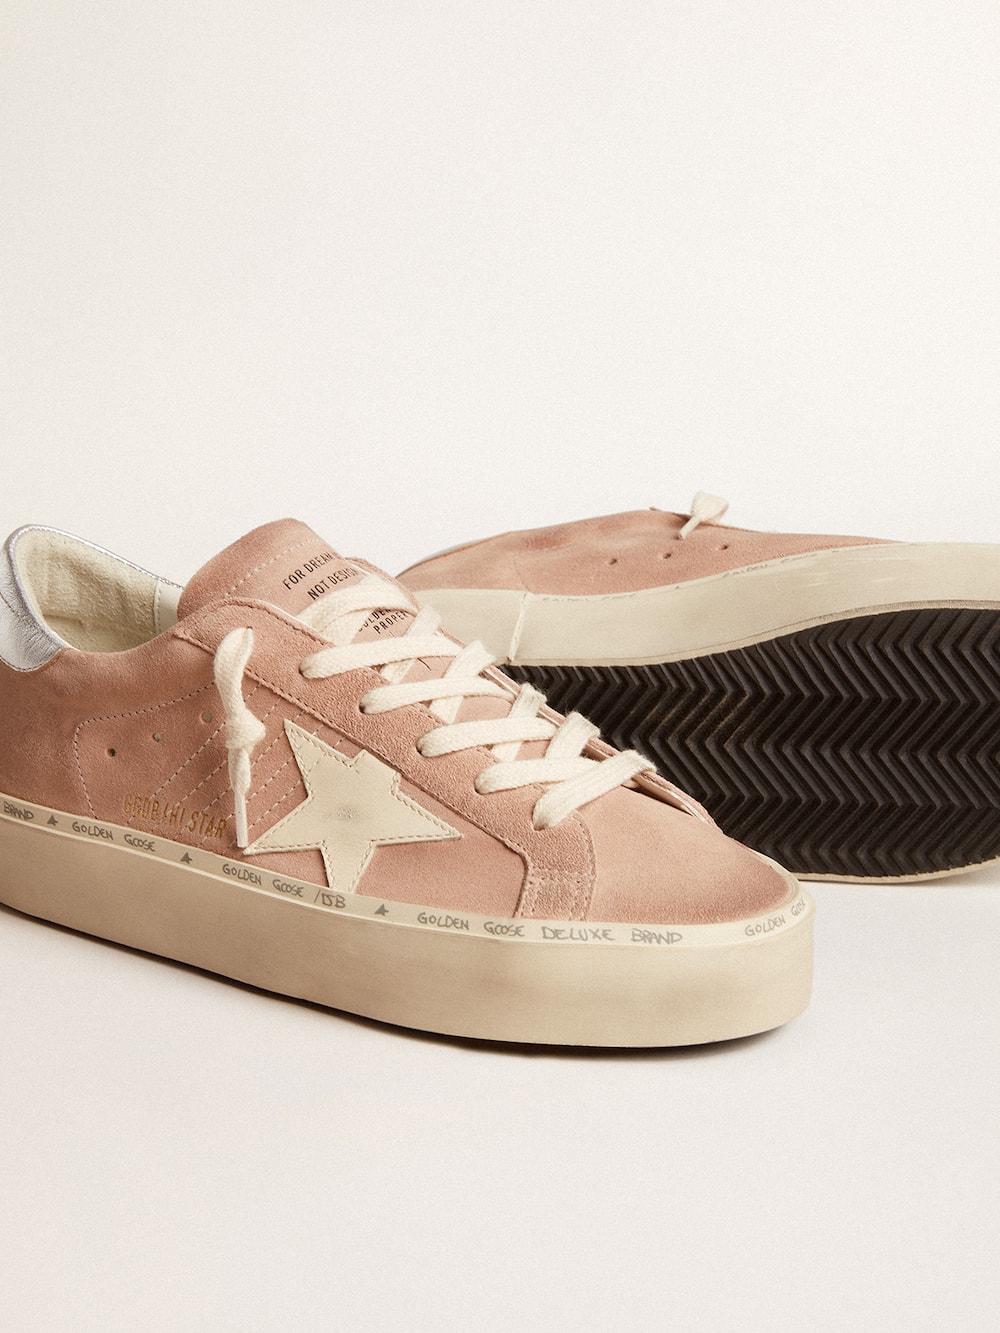 Golden Goose - Hi Star in pink suede with cream star and silver leather heel tab in 